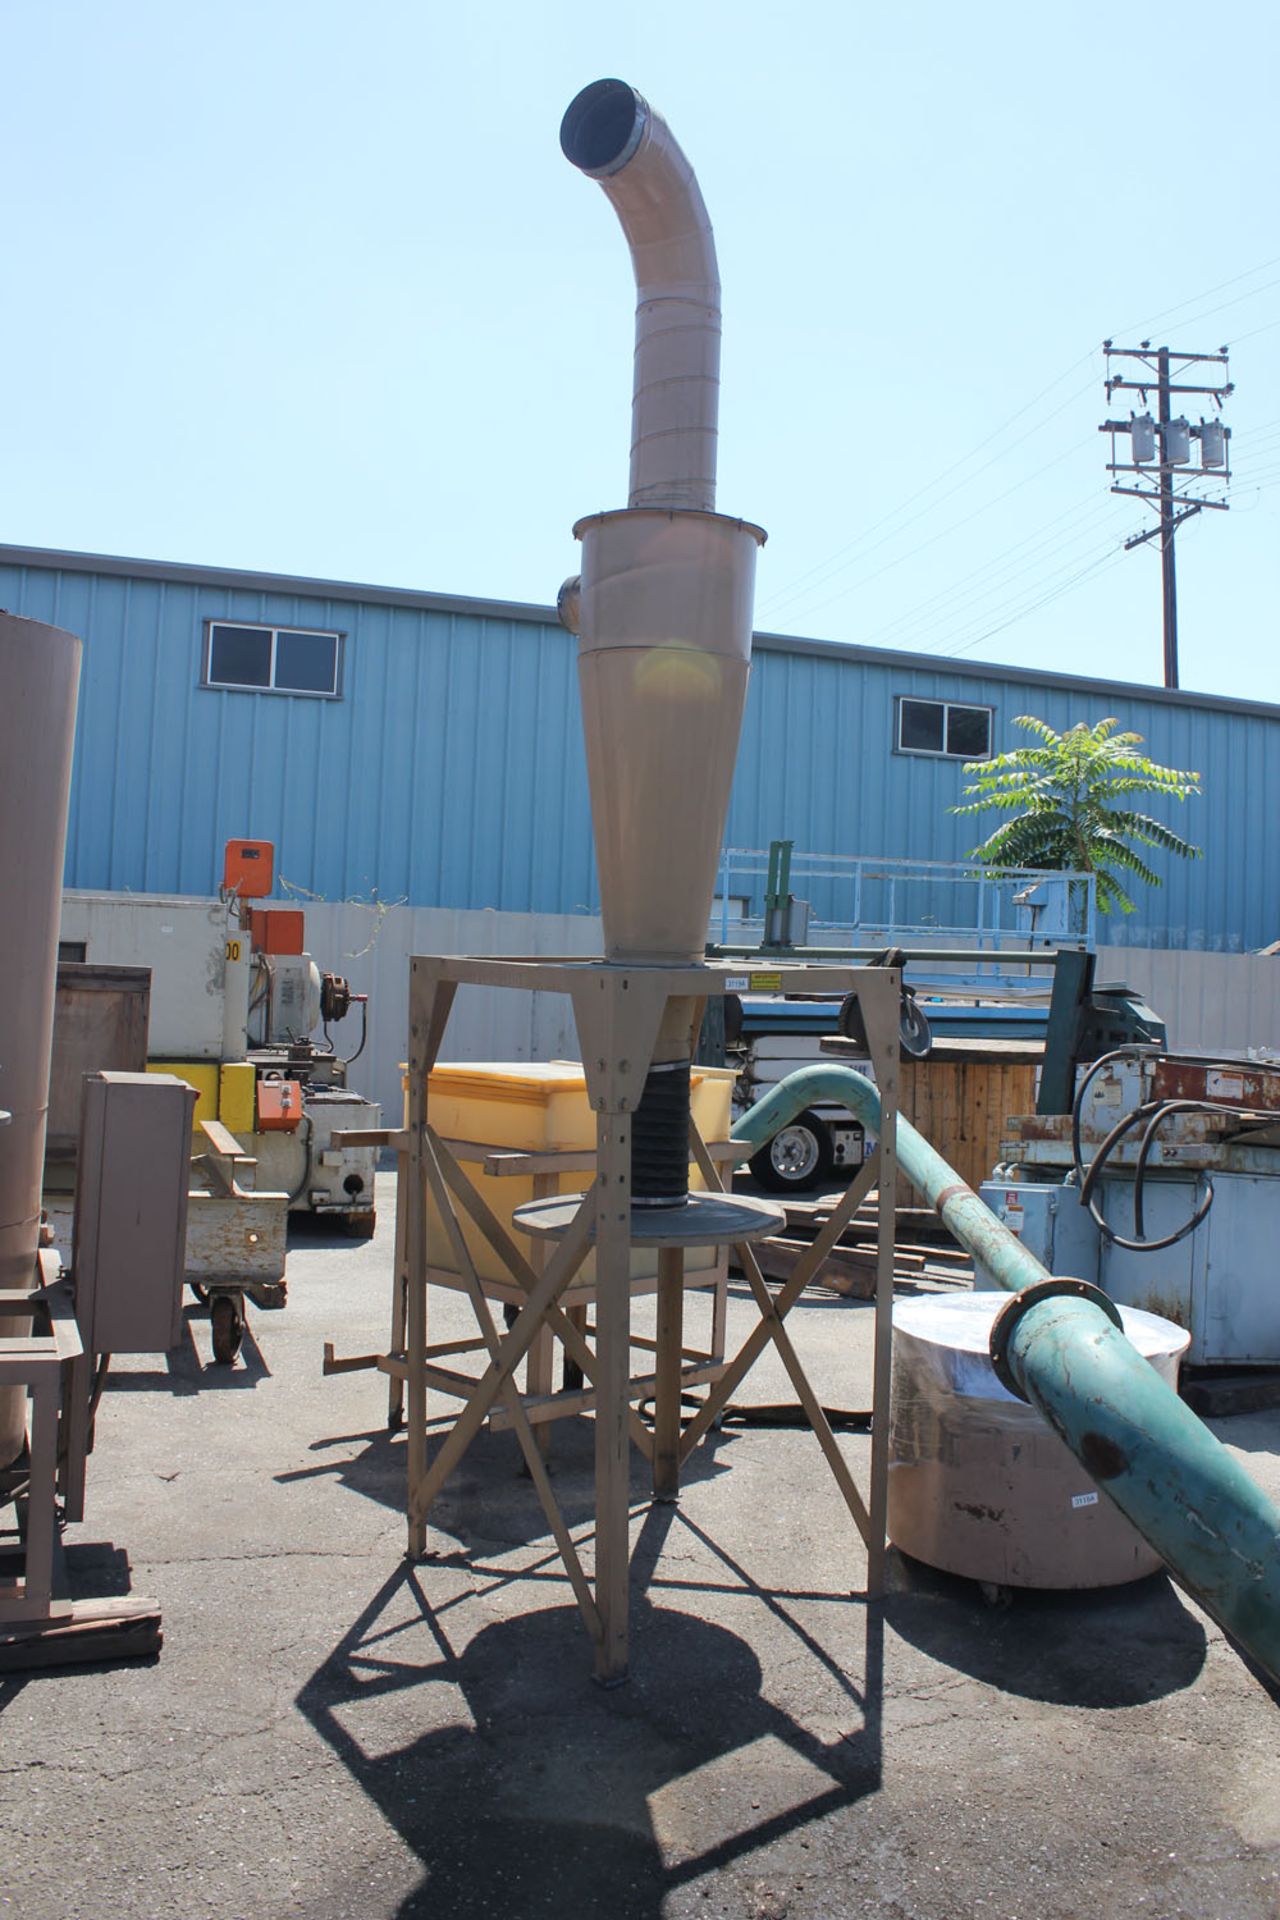 2,000 CFM Torit Dust Collector System, Model: 2DF4, Serial #: 225757 (3119A) - Image 5 of 5